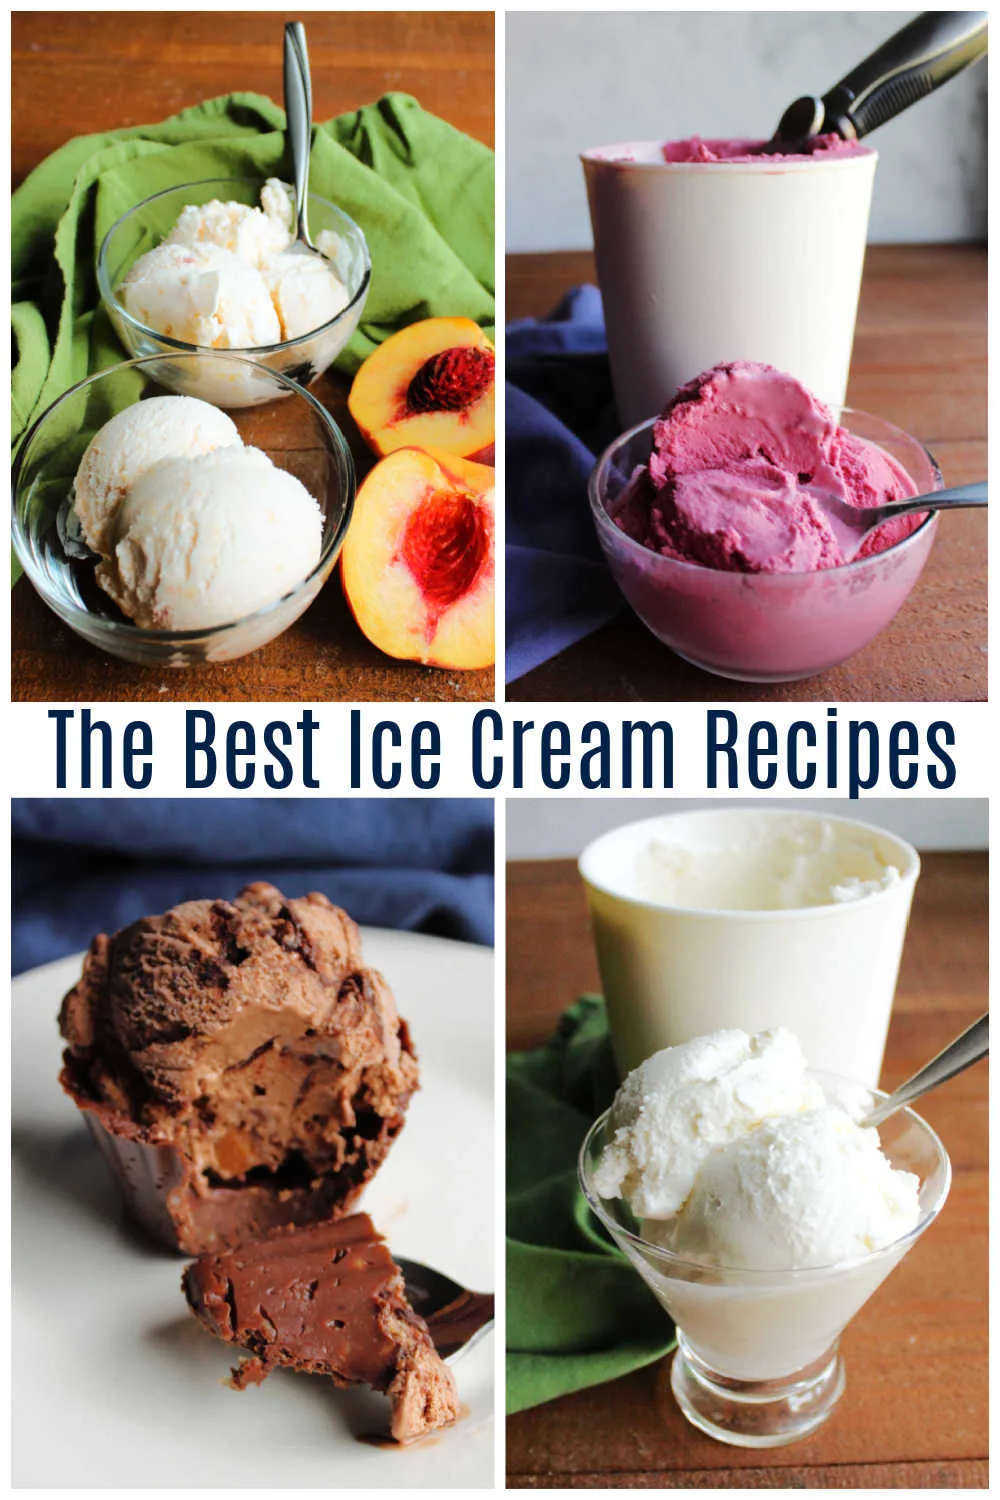 Ice cream is the perfect summertime treat. It cools you off and tastes amazing.  I’m sharing some of our favorite recipes for homemade sherbet, ice cream and no churn ice cream with you for your inspiration and enjoyment!